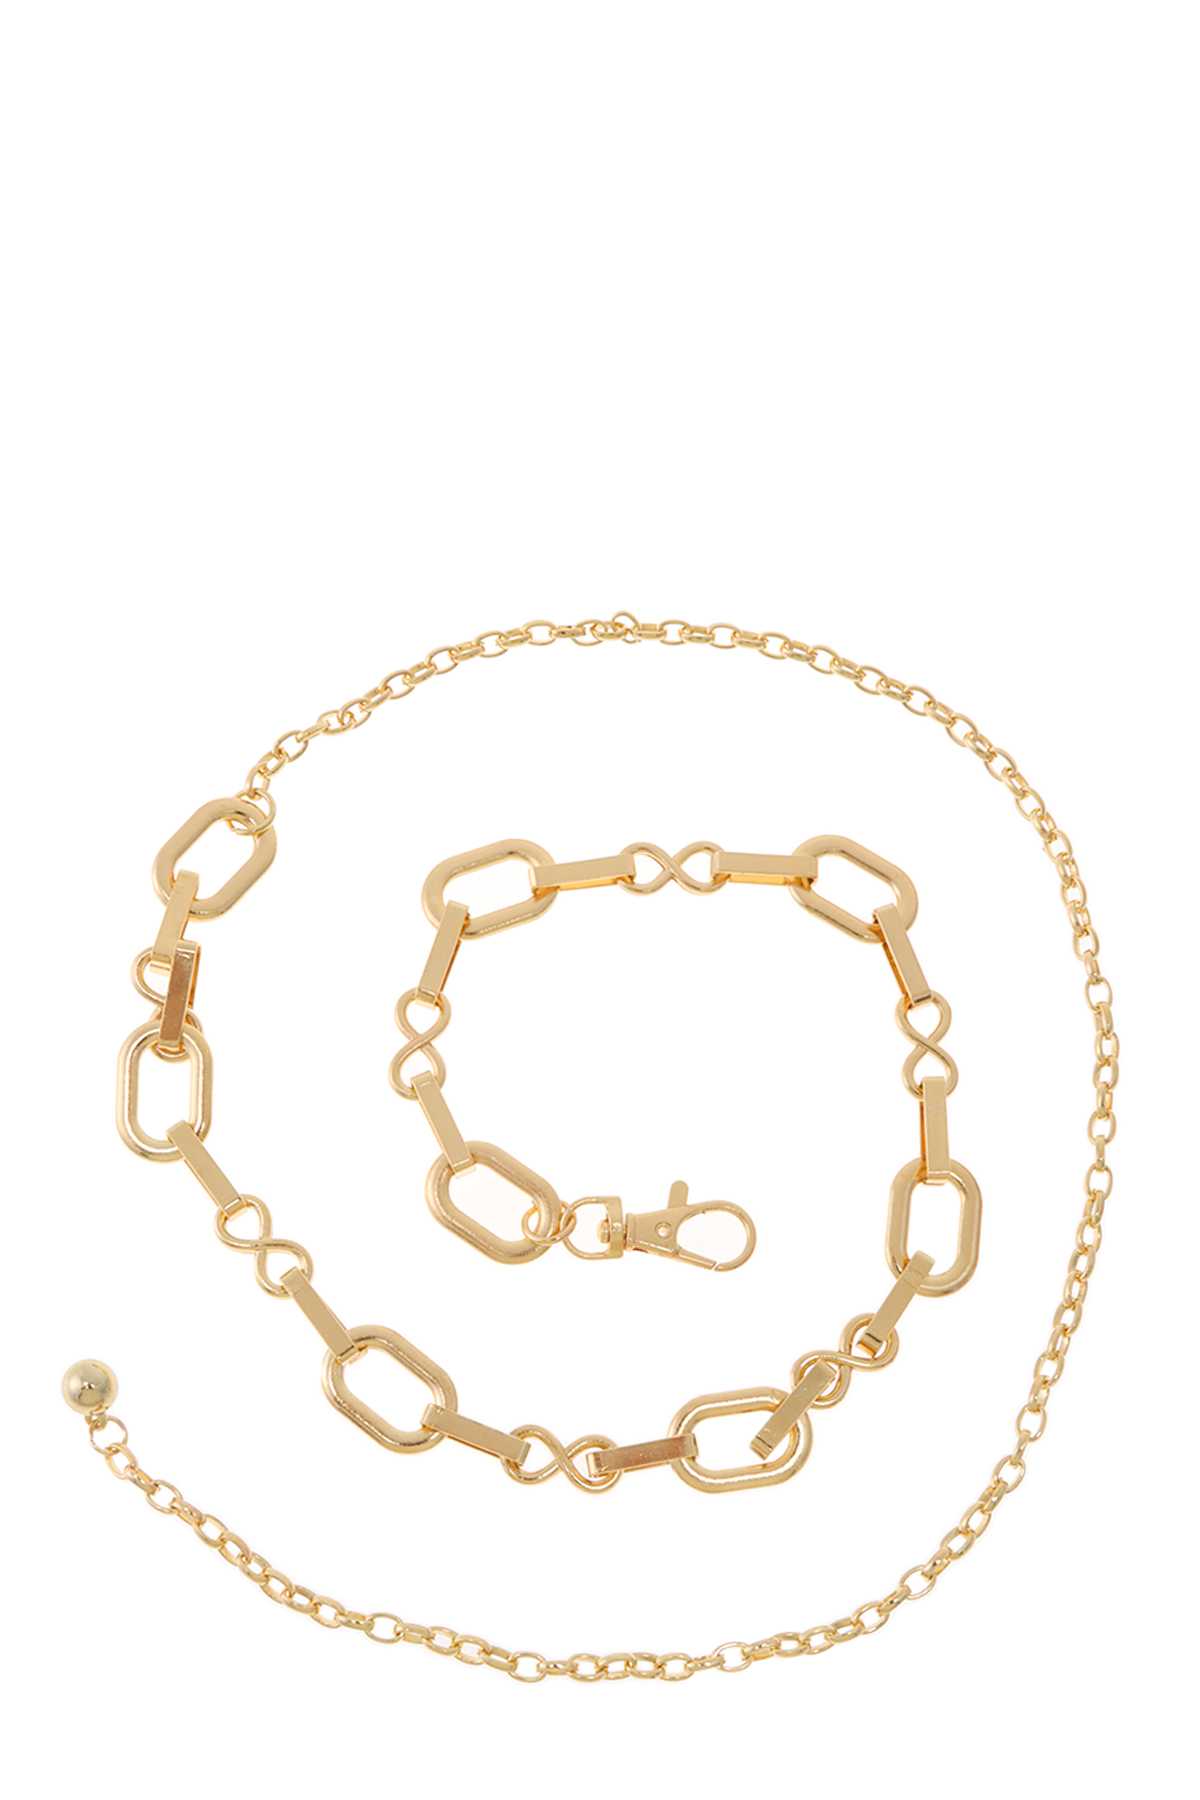 OVAL AND INFINITY METAL LINKED CHAIN BELT